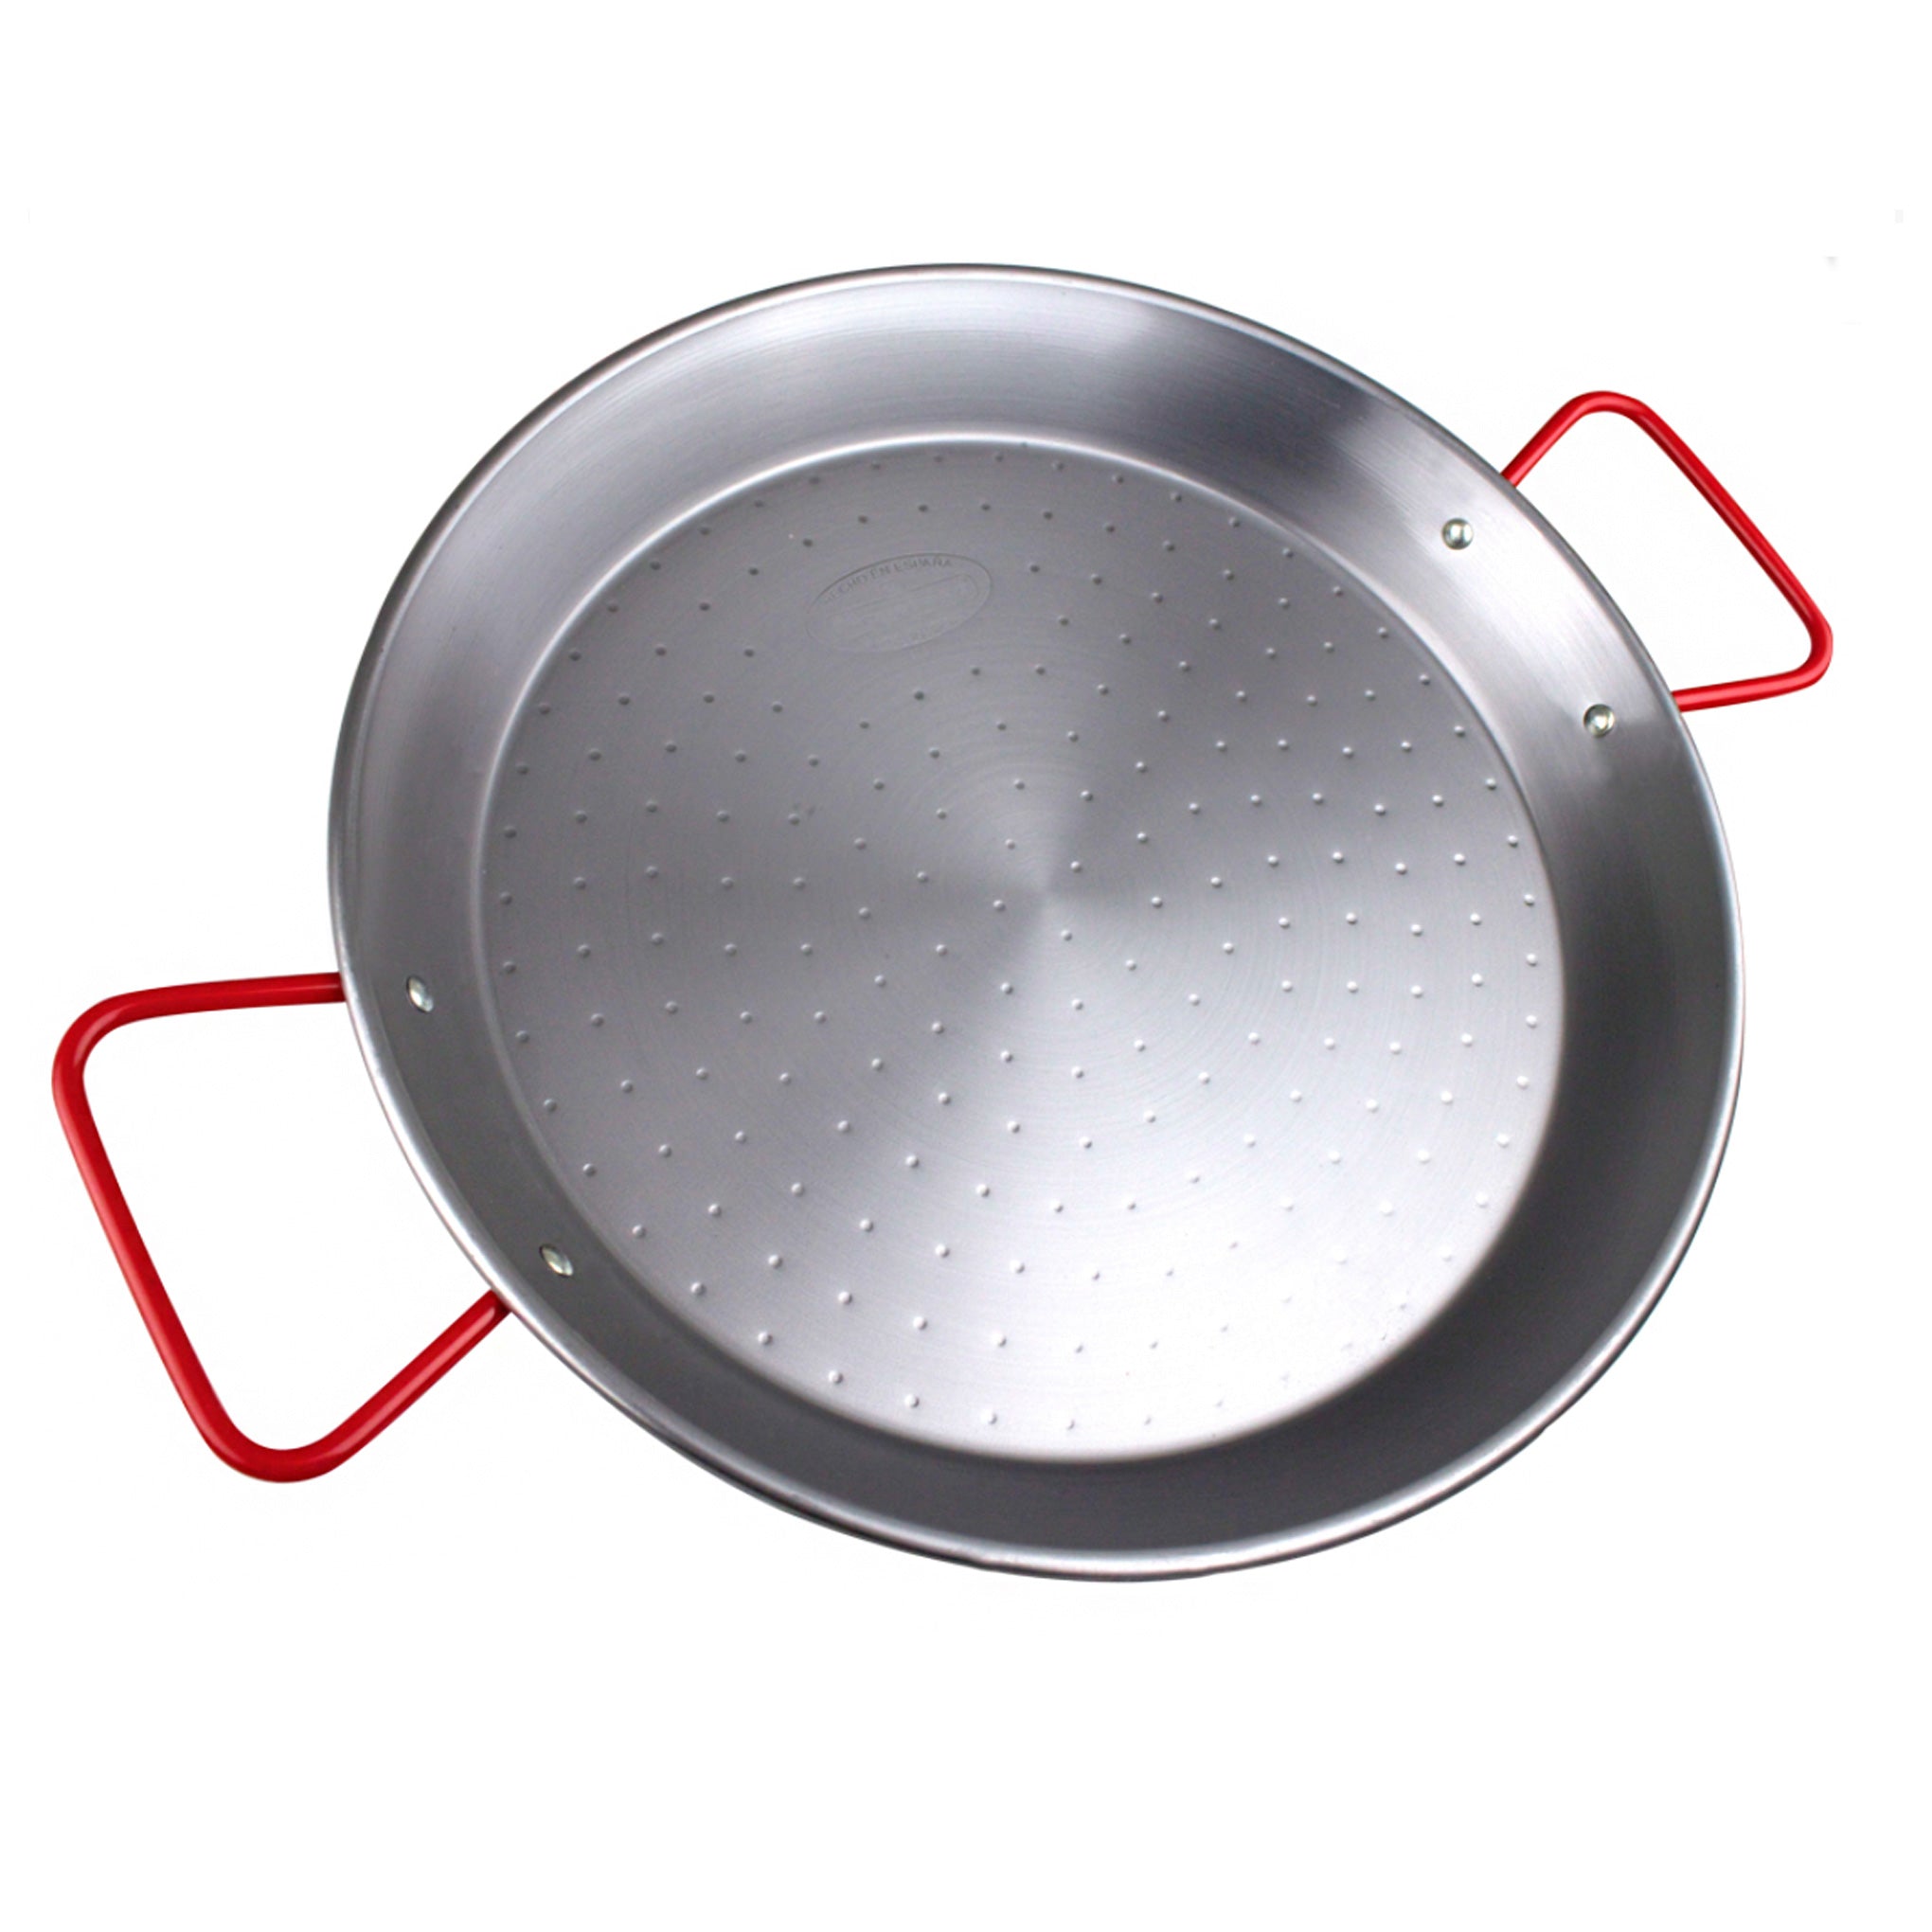 12 Inch Carbon Steel Paella Pan, 4 person